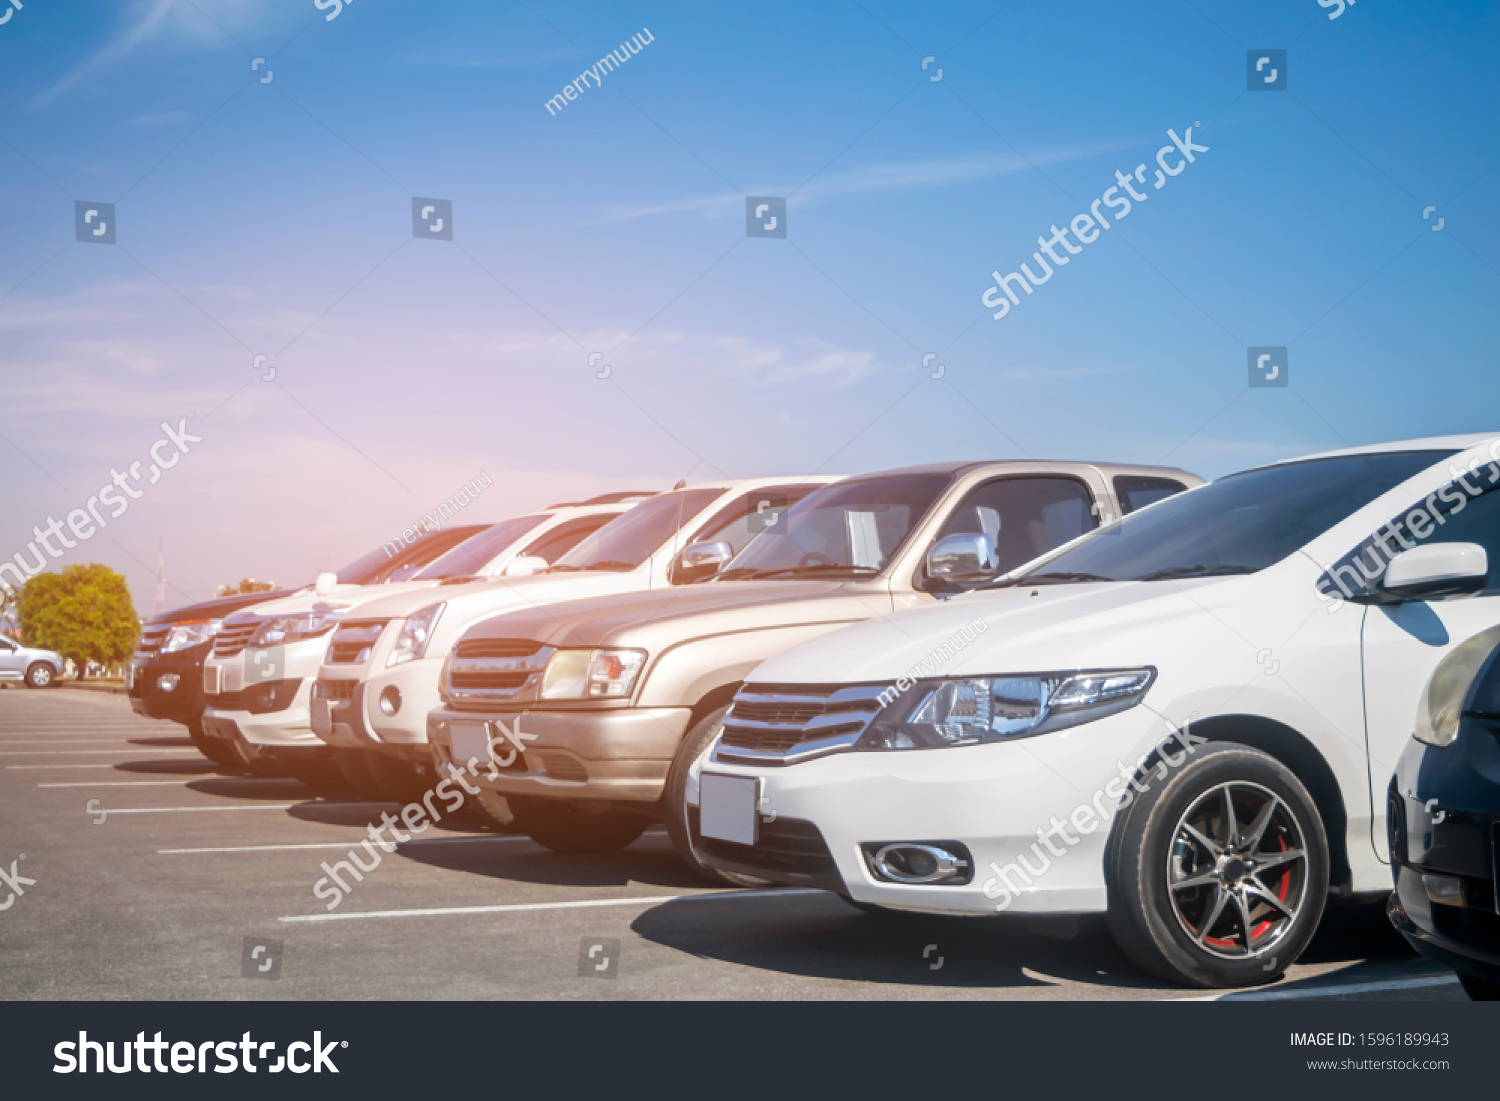 Cars parking in asphalt parking lot in a row with blue sky background. Outdoor parking lot with fresh ozone, green nature environment of transportation and technology concept

 #1596189943